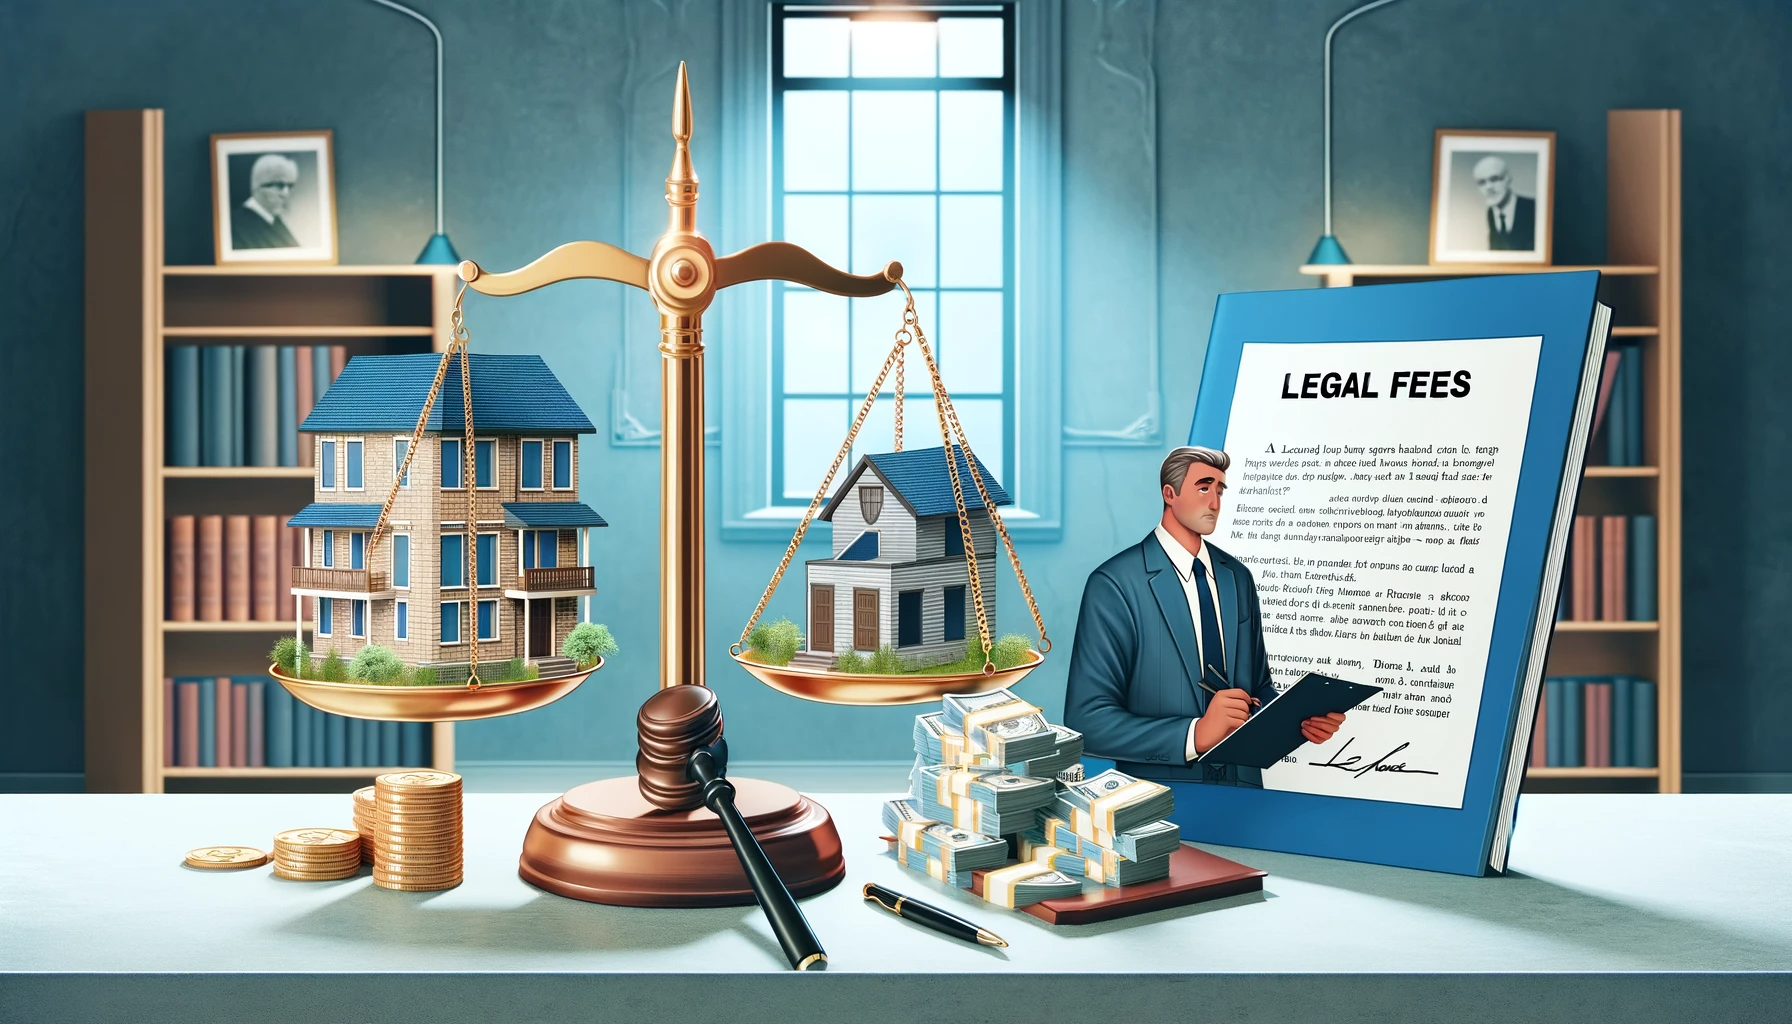 Can A Landlord Charge A Tenant for Legal Fees?